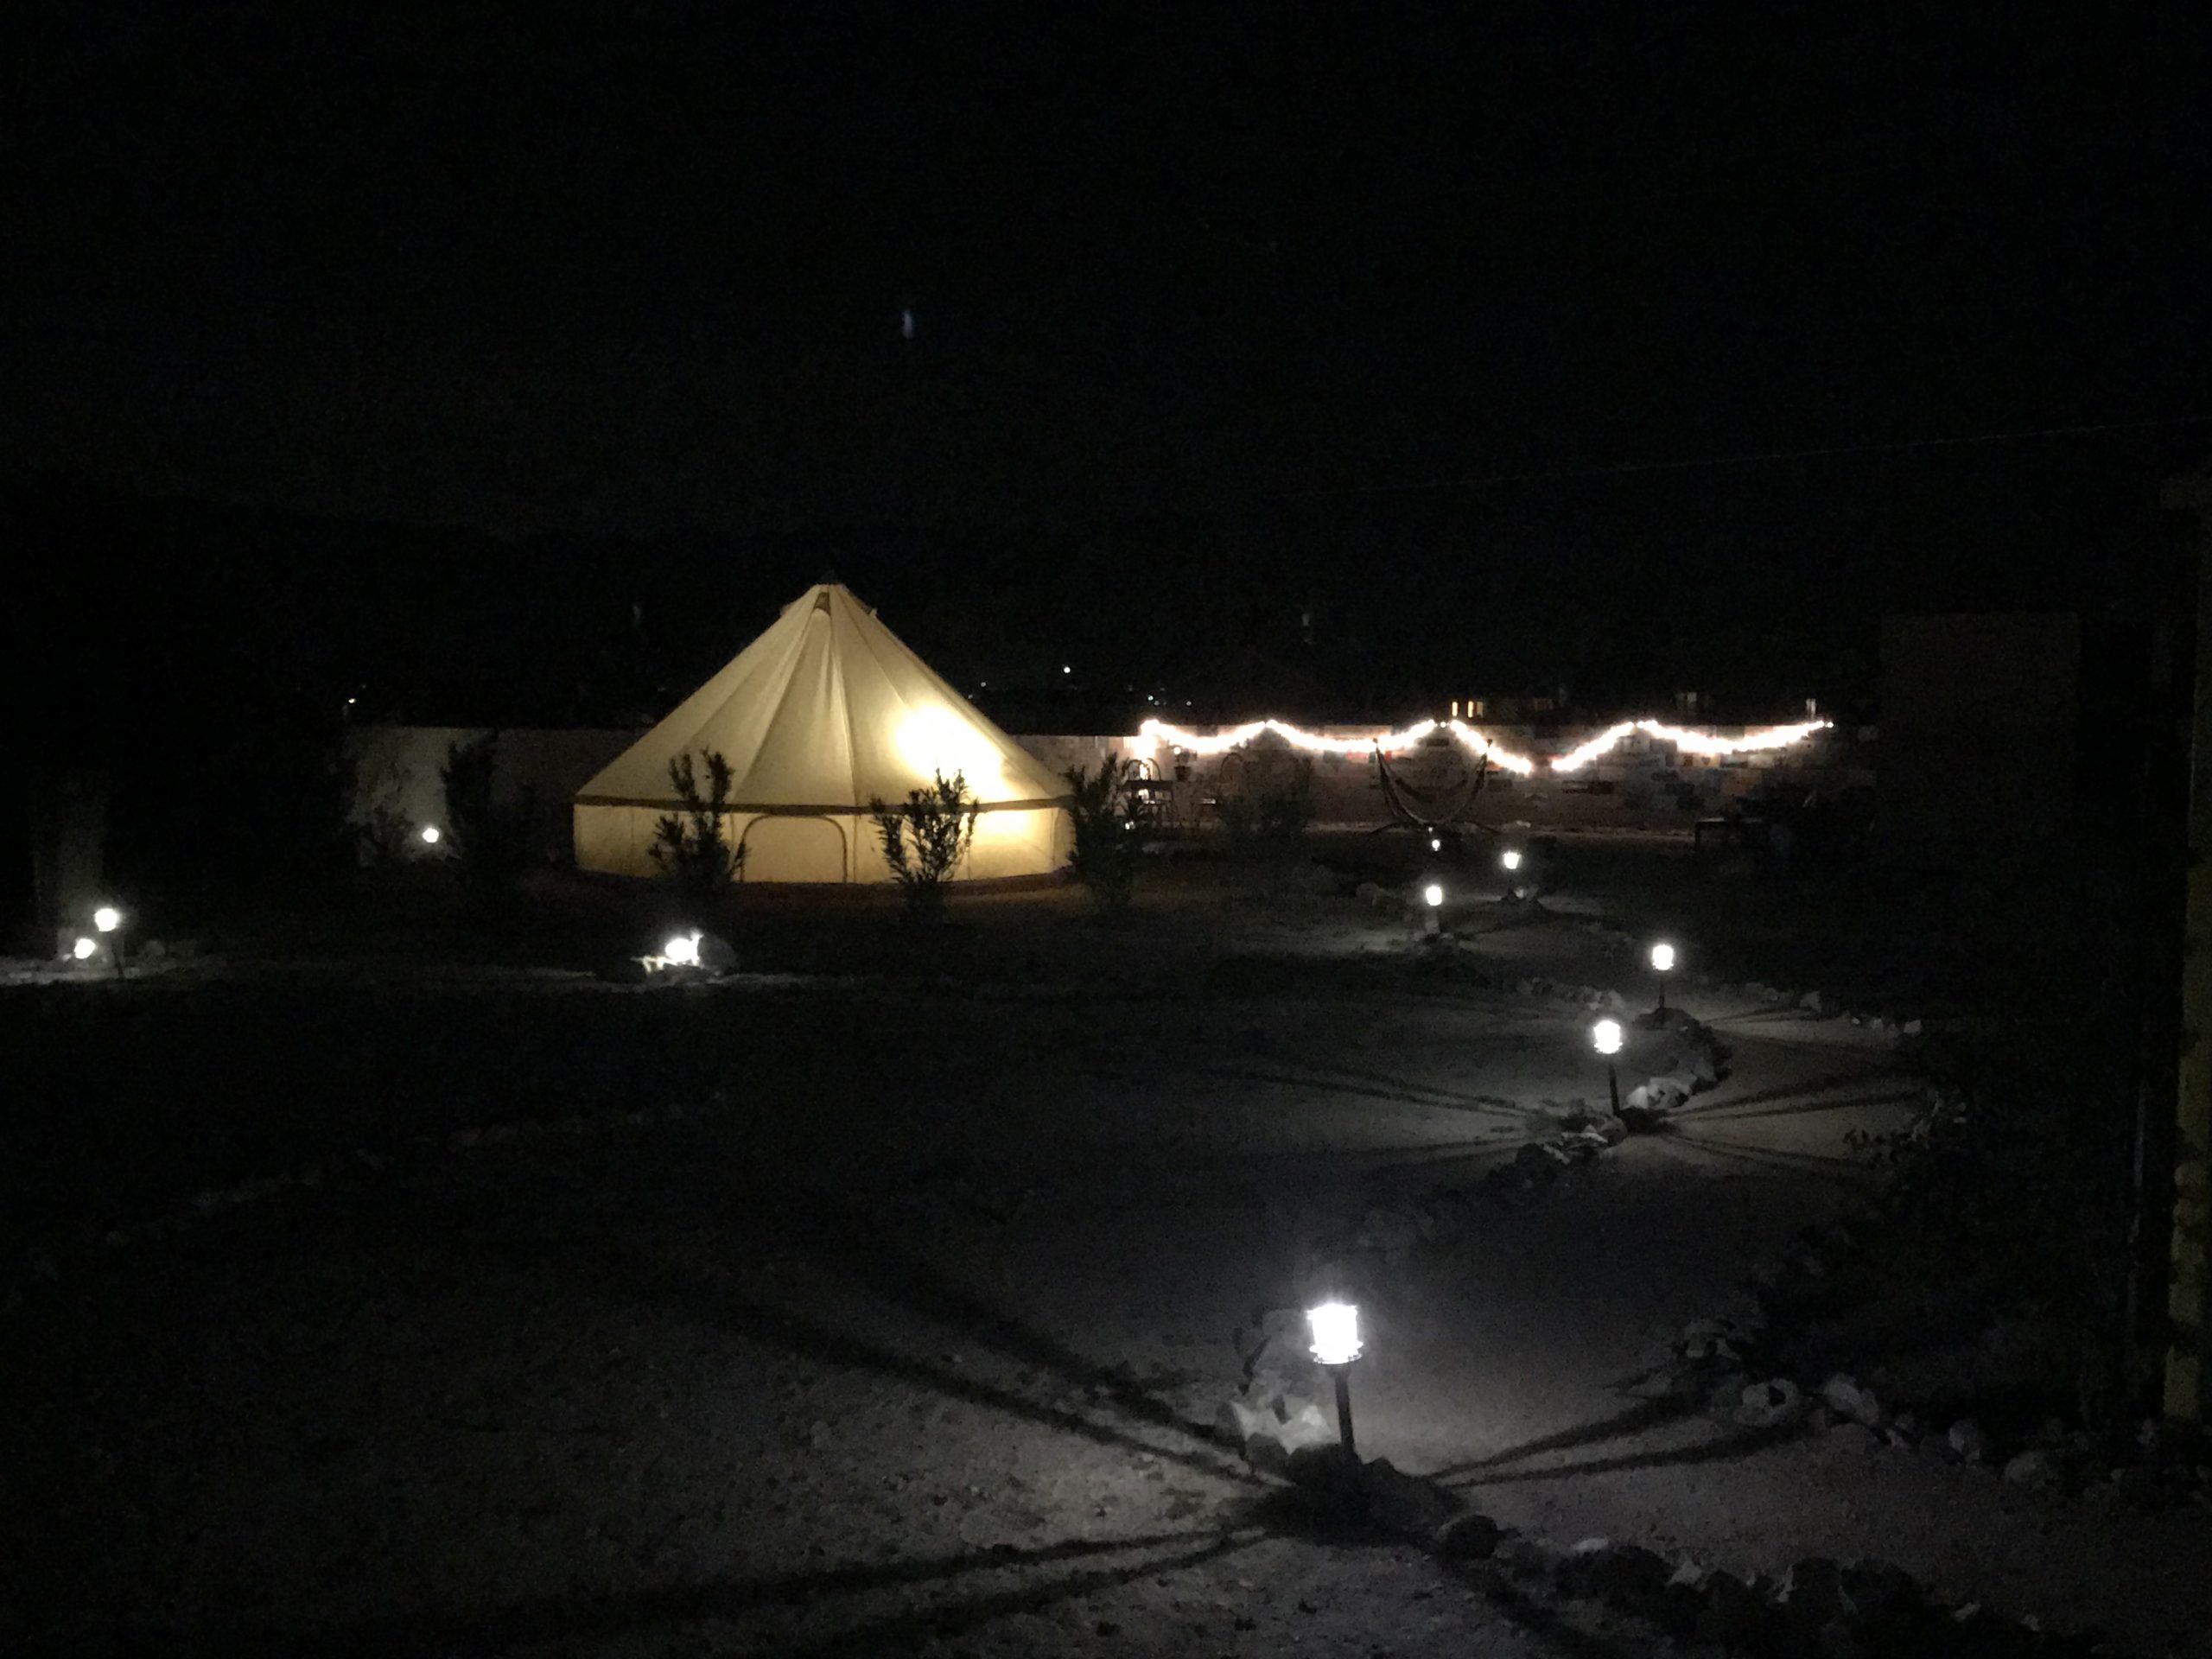 The other yurt on the property lit up at night